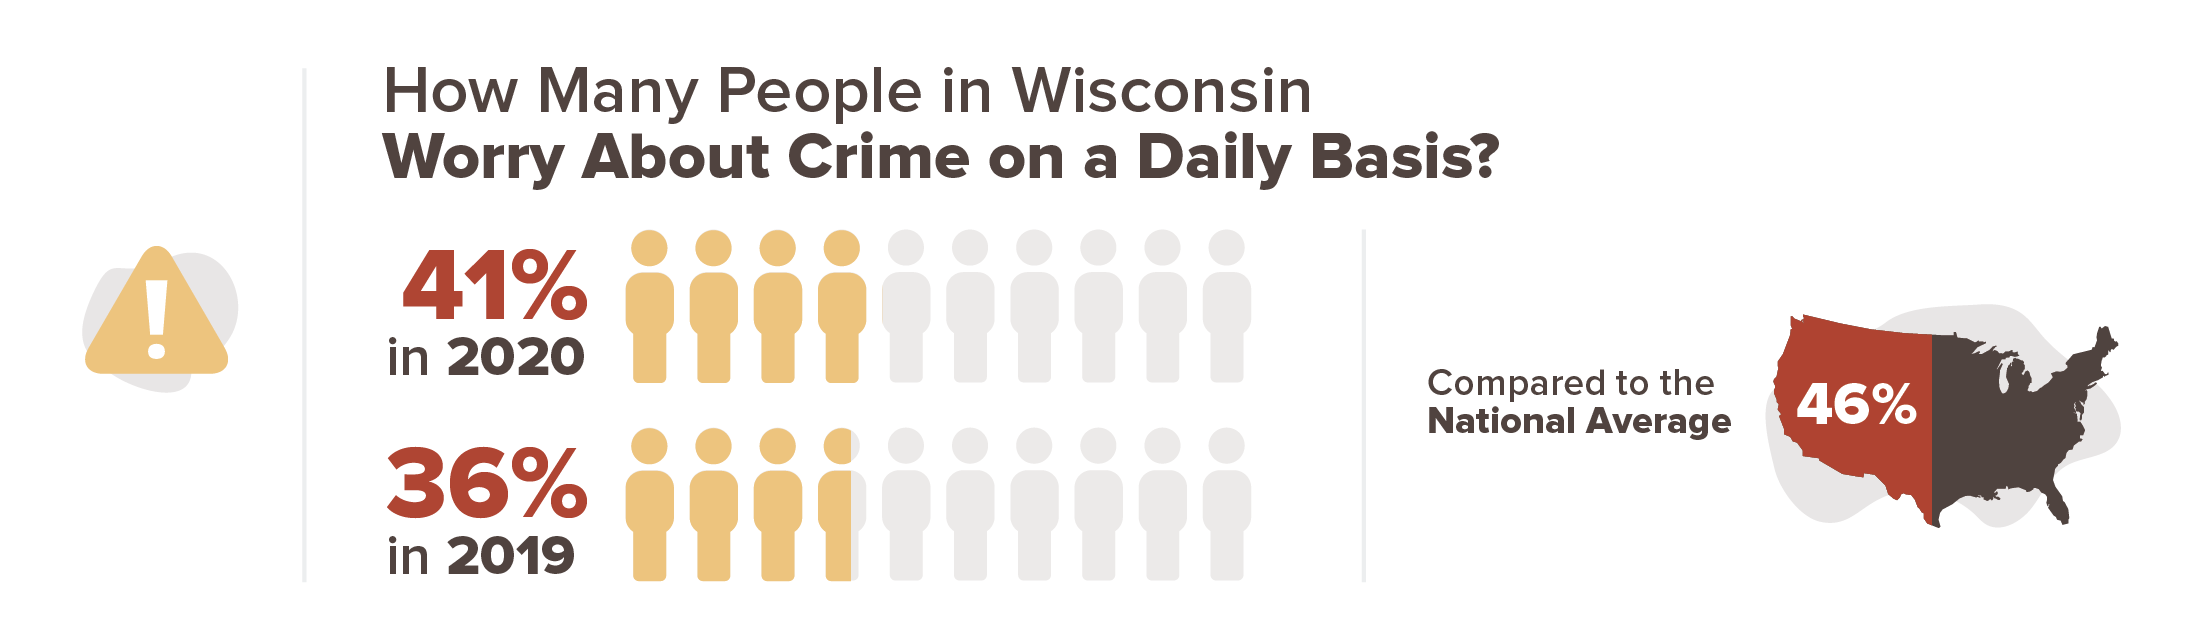 Wisconsin crime concern infographic